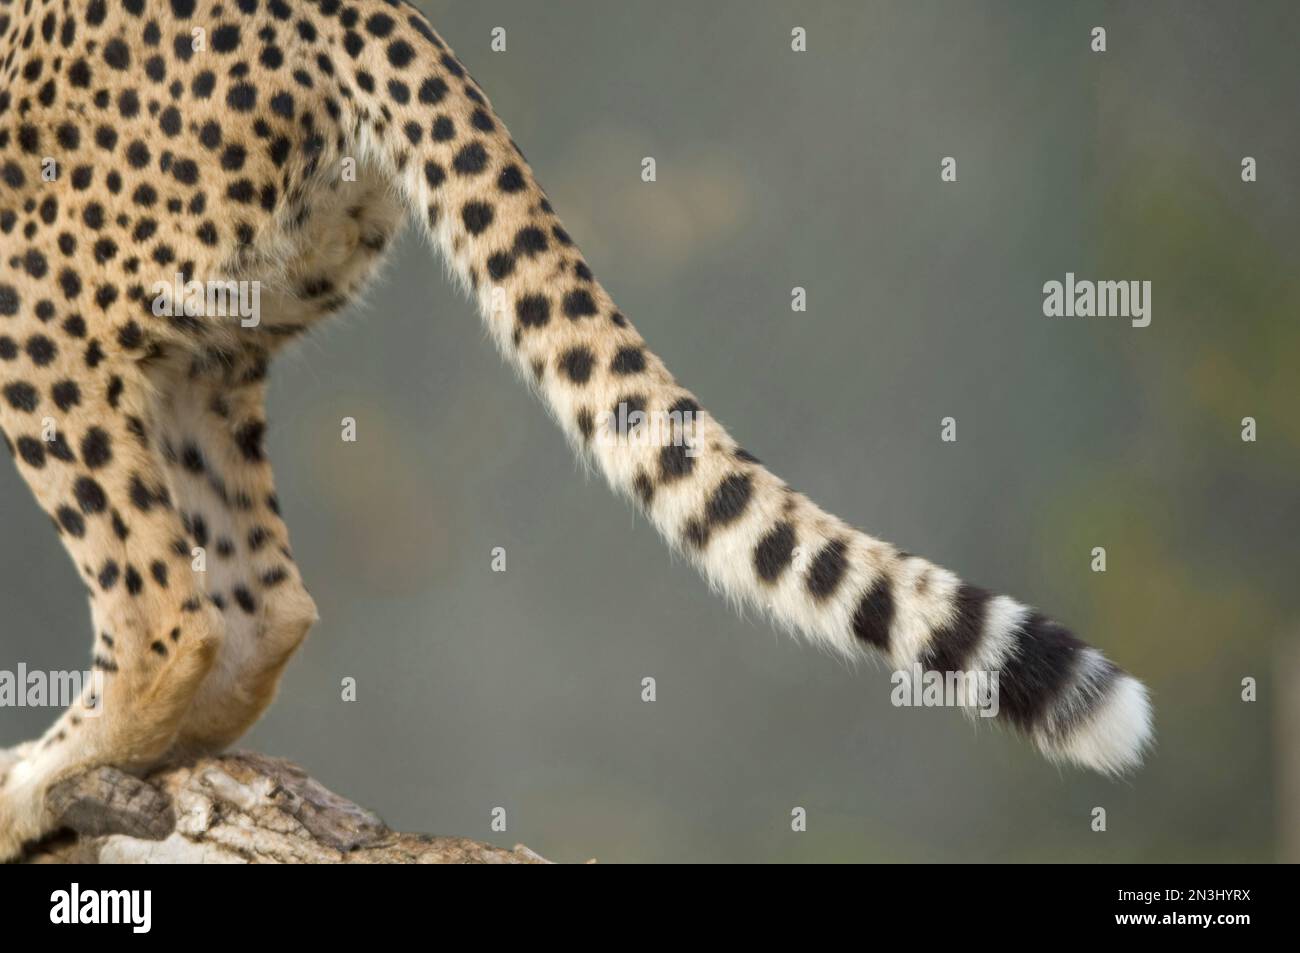 Spotted hind and tail of a Cheetah (Acinonyx jubatus) standing on a log in a zoo enclosure; Denver, Colorado, United States of America Stock Photo